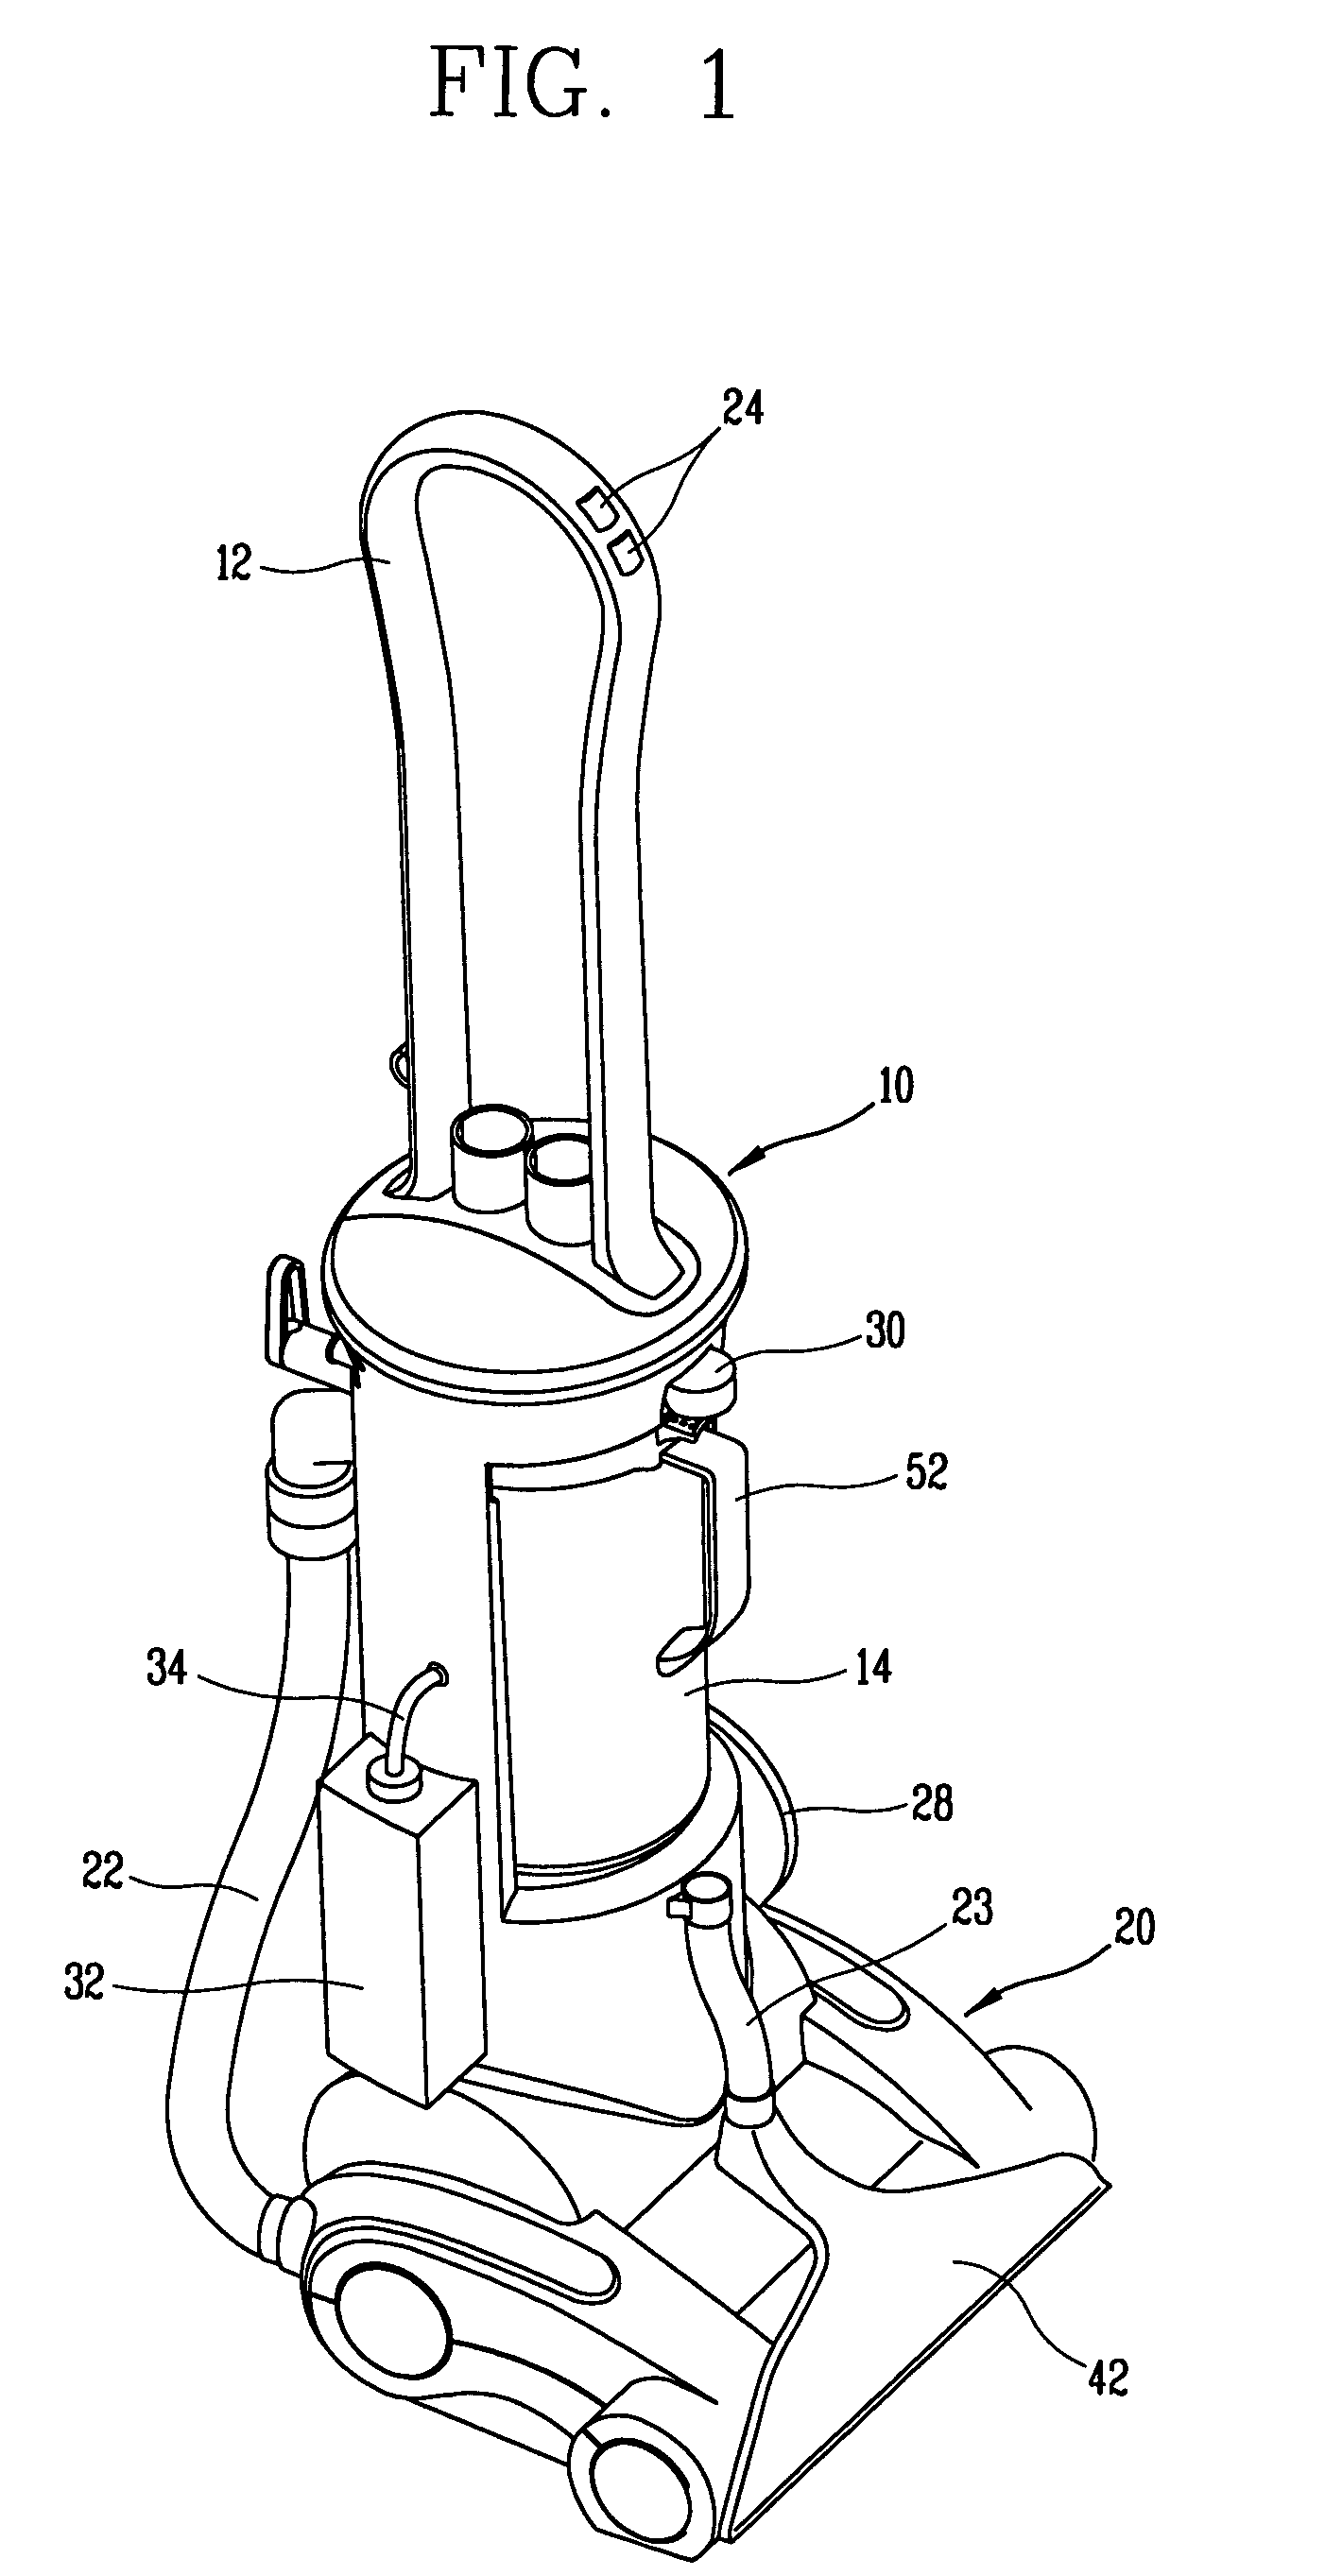 Multi-functional cleaner selectively performing vacuum cleaning and water cleaning